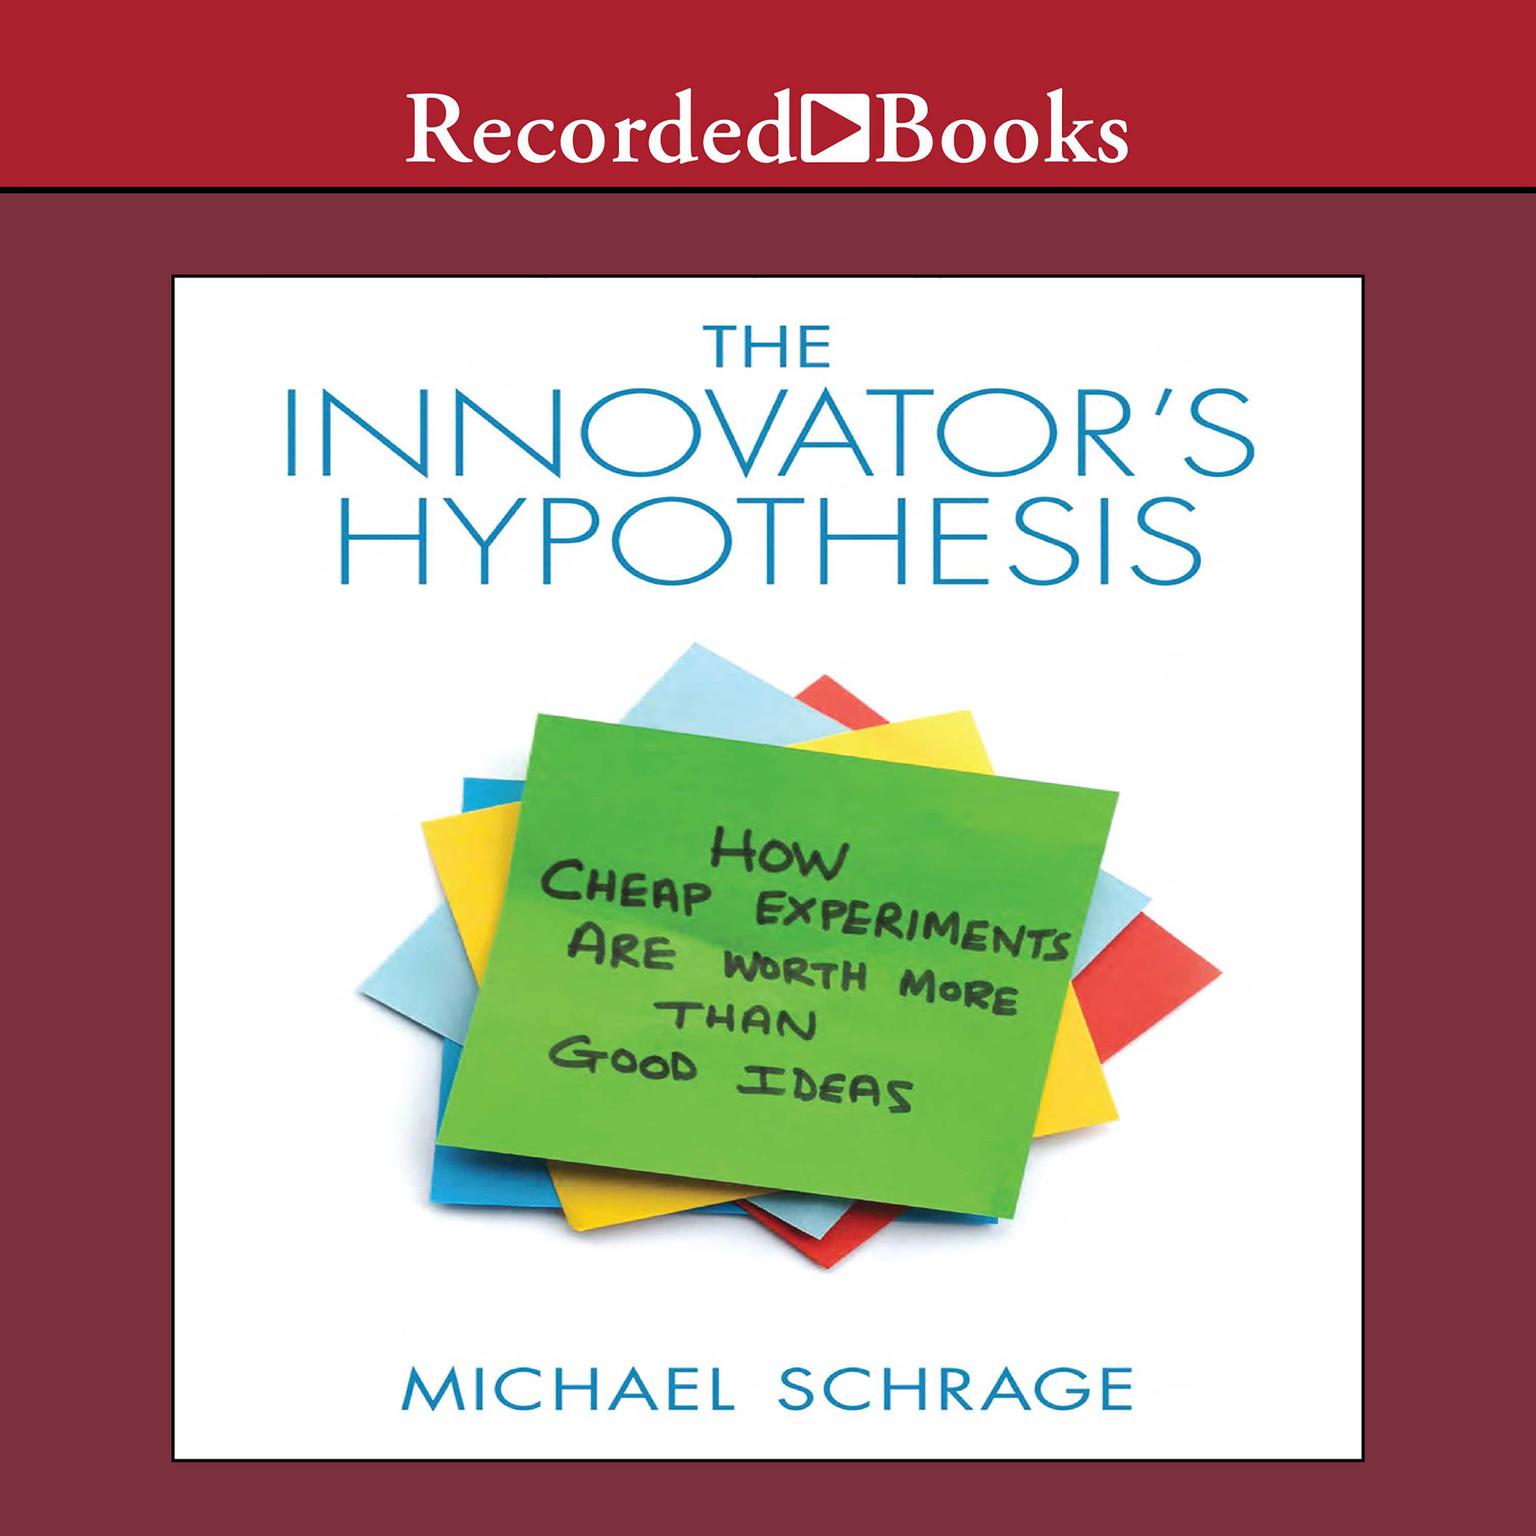 The Innovators Hypothesis: How Cheap Experiments Are Worth More than Good Ideas Audiobook, by Michael Schrage